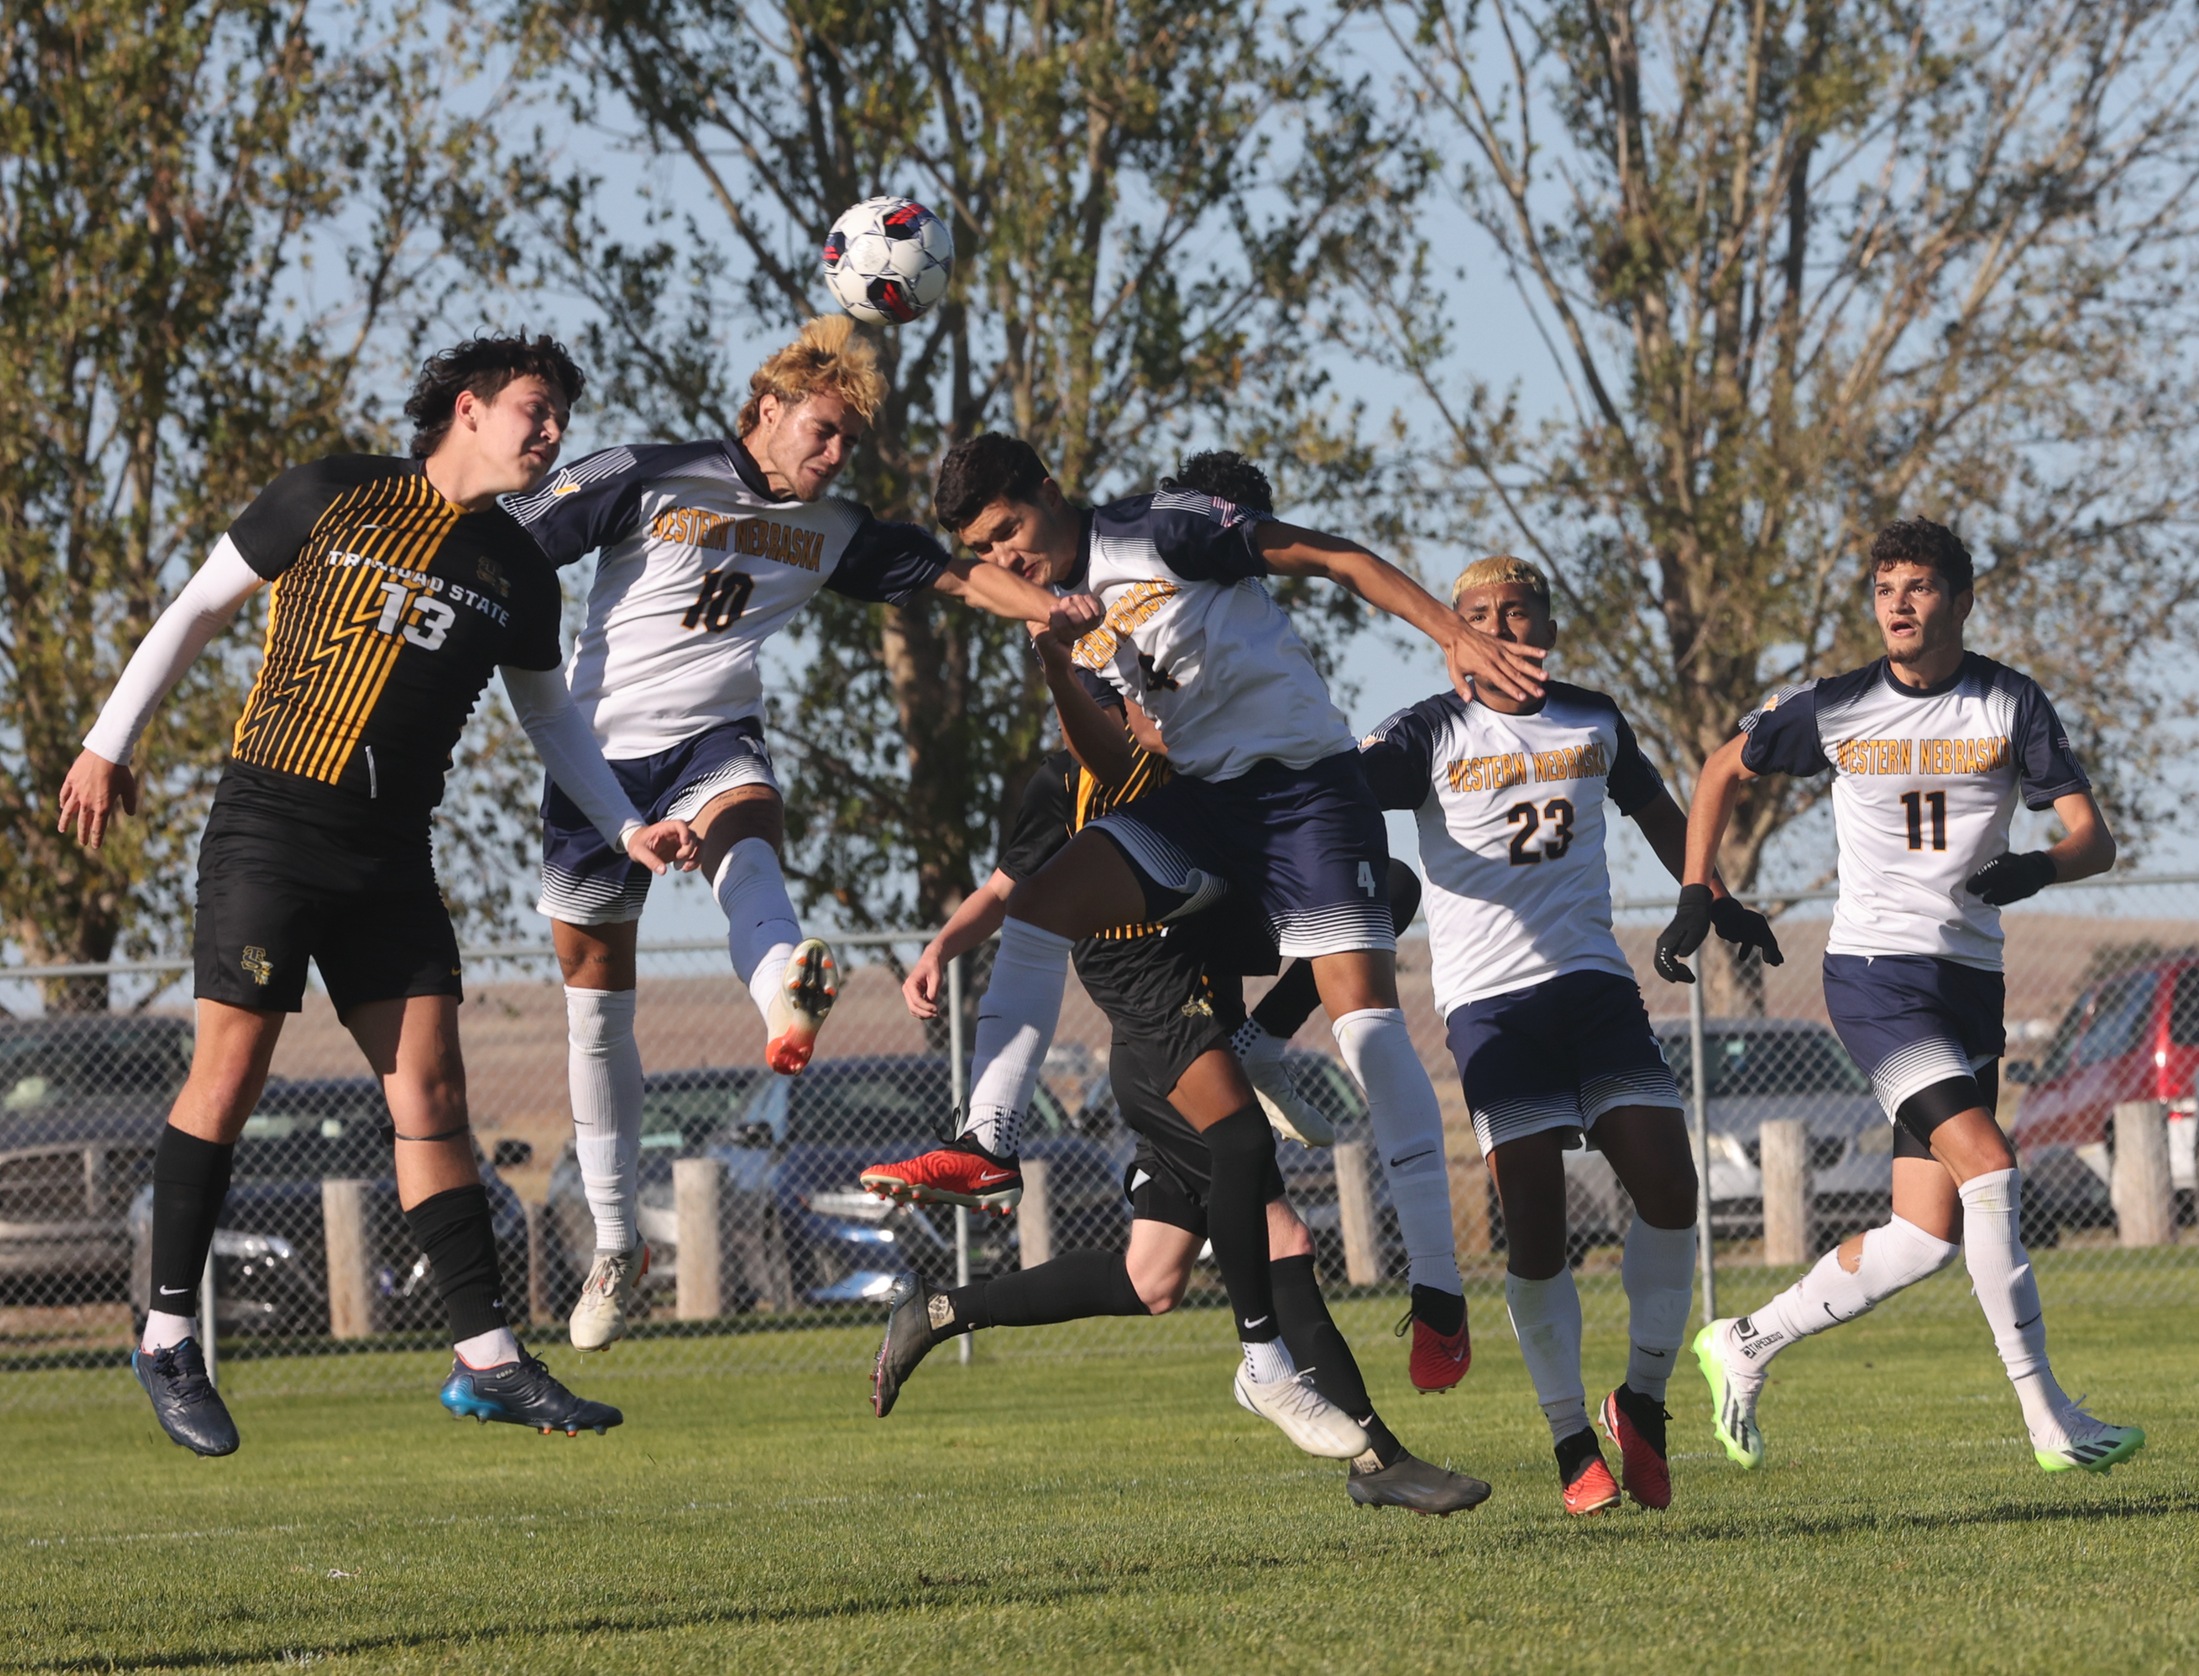 Header action in the Trinidad State match.